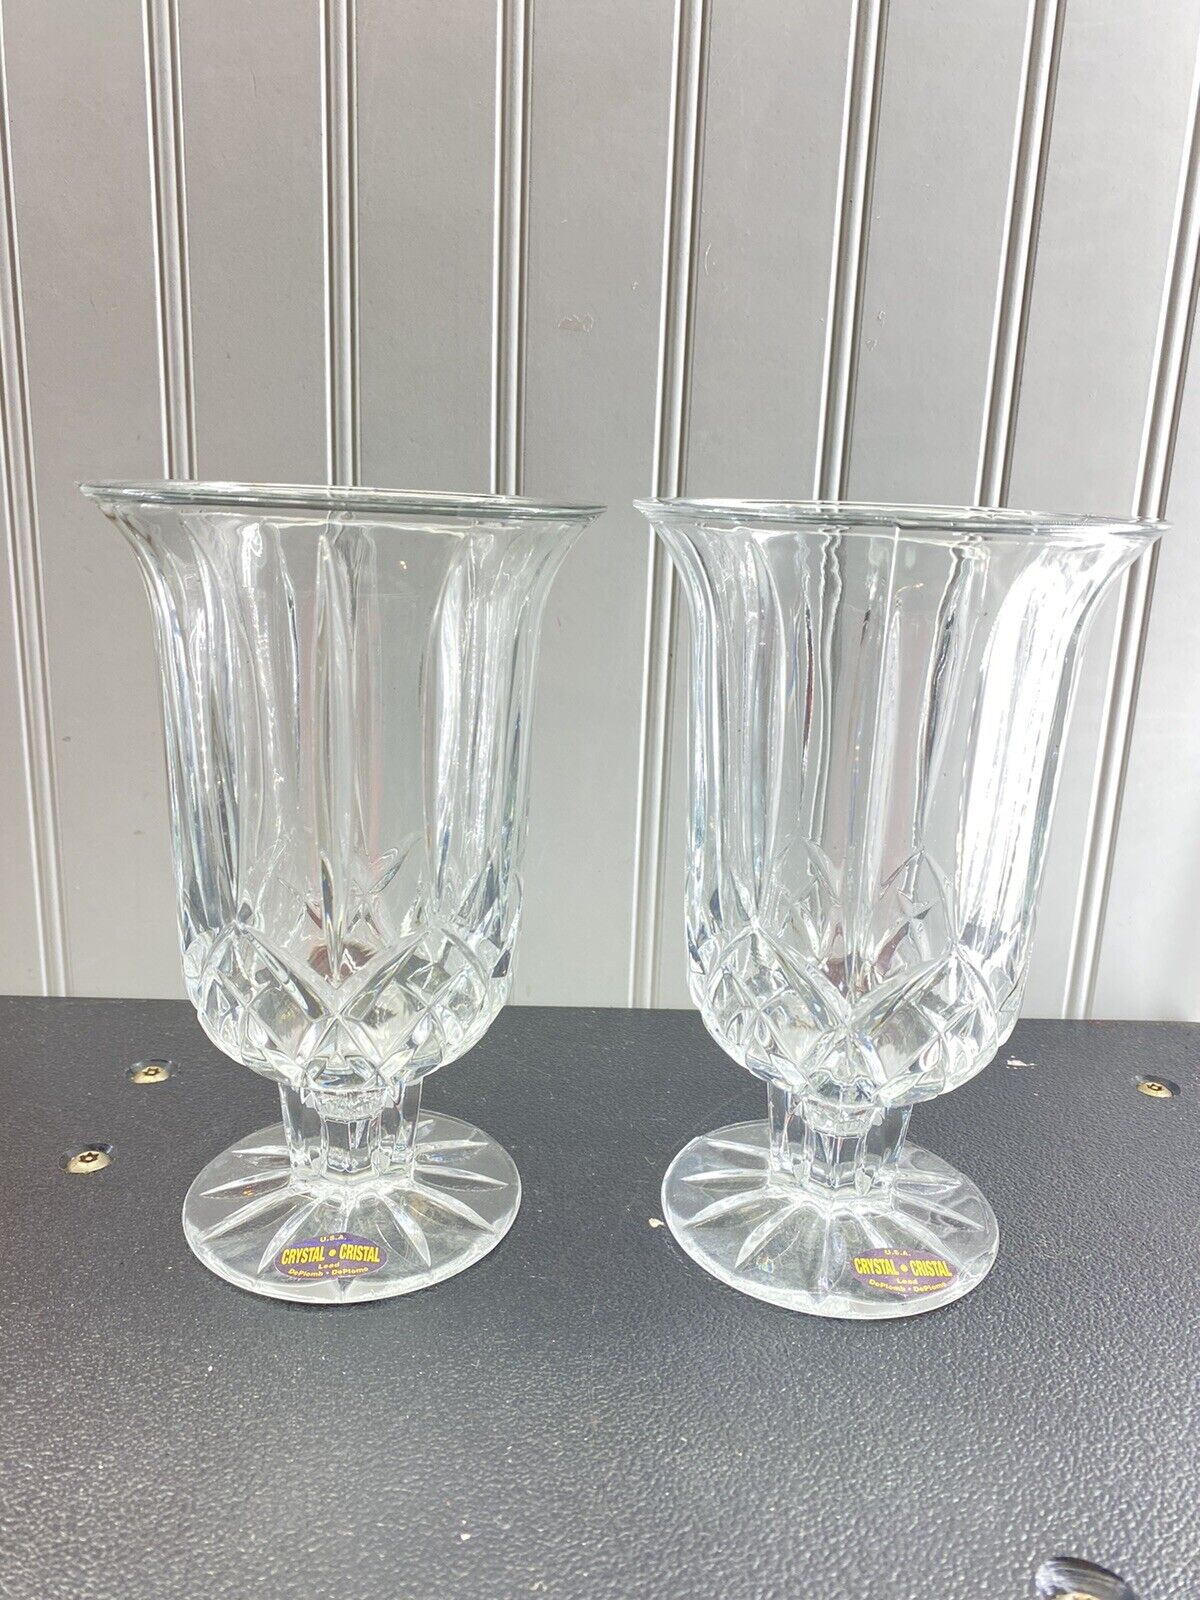 Vintage Deplomb Crystal Glass Candle Holders  2 Pc  Set Of 2